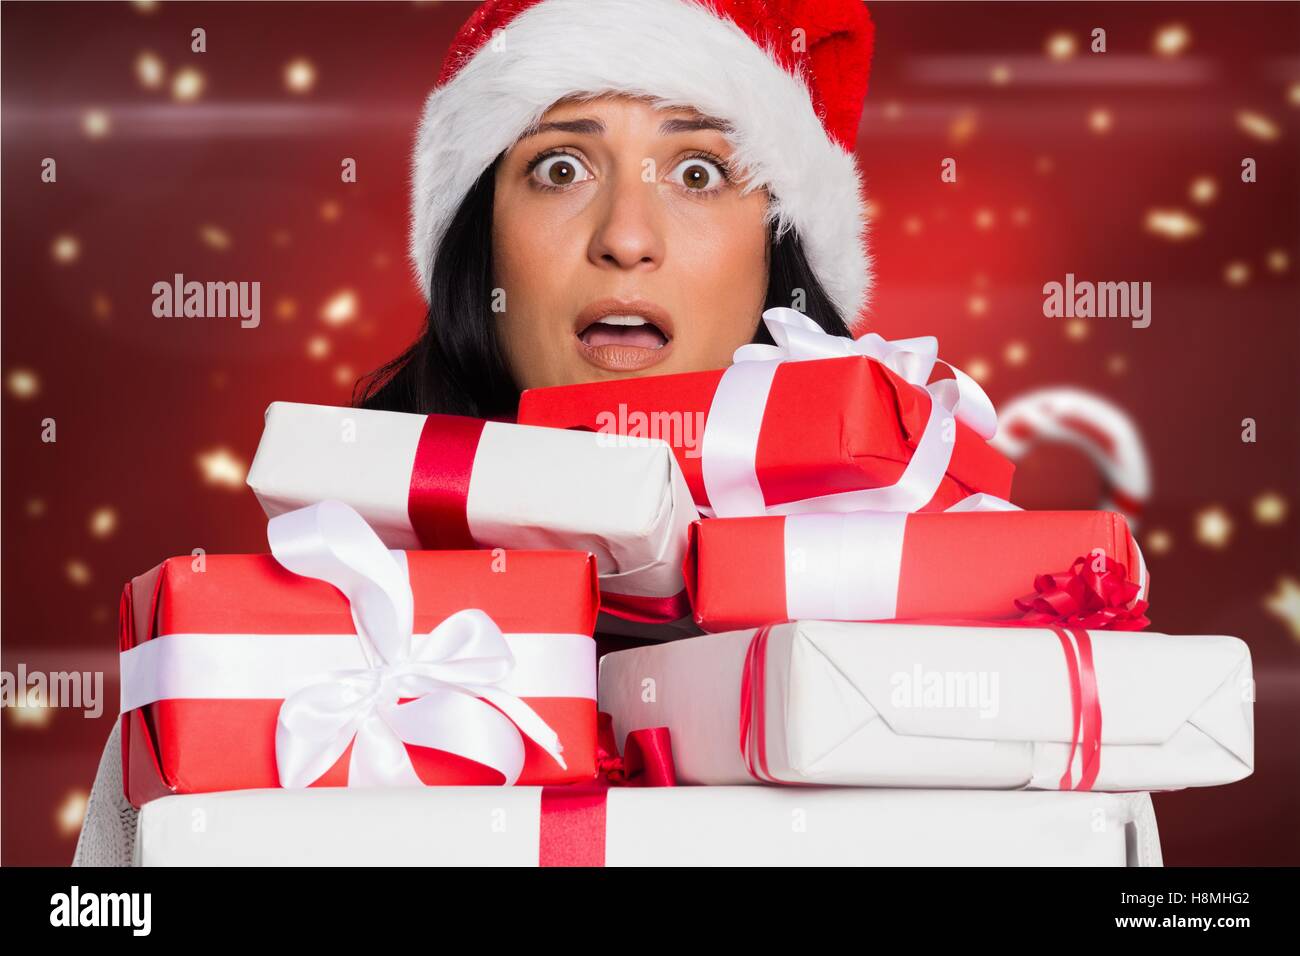 Shocked woman in santa hat holding stack of gift boxes Stock Photo